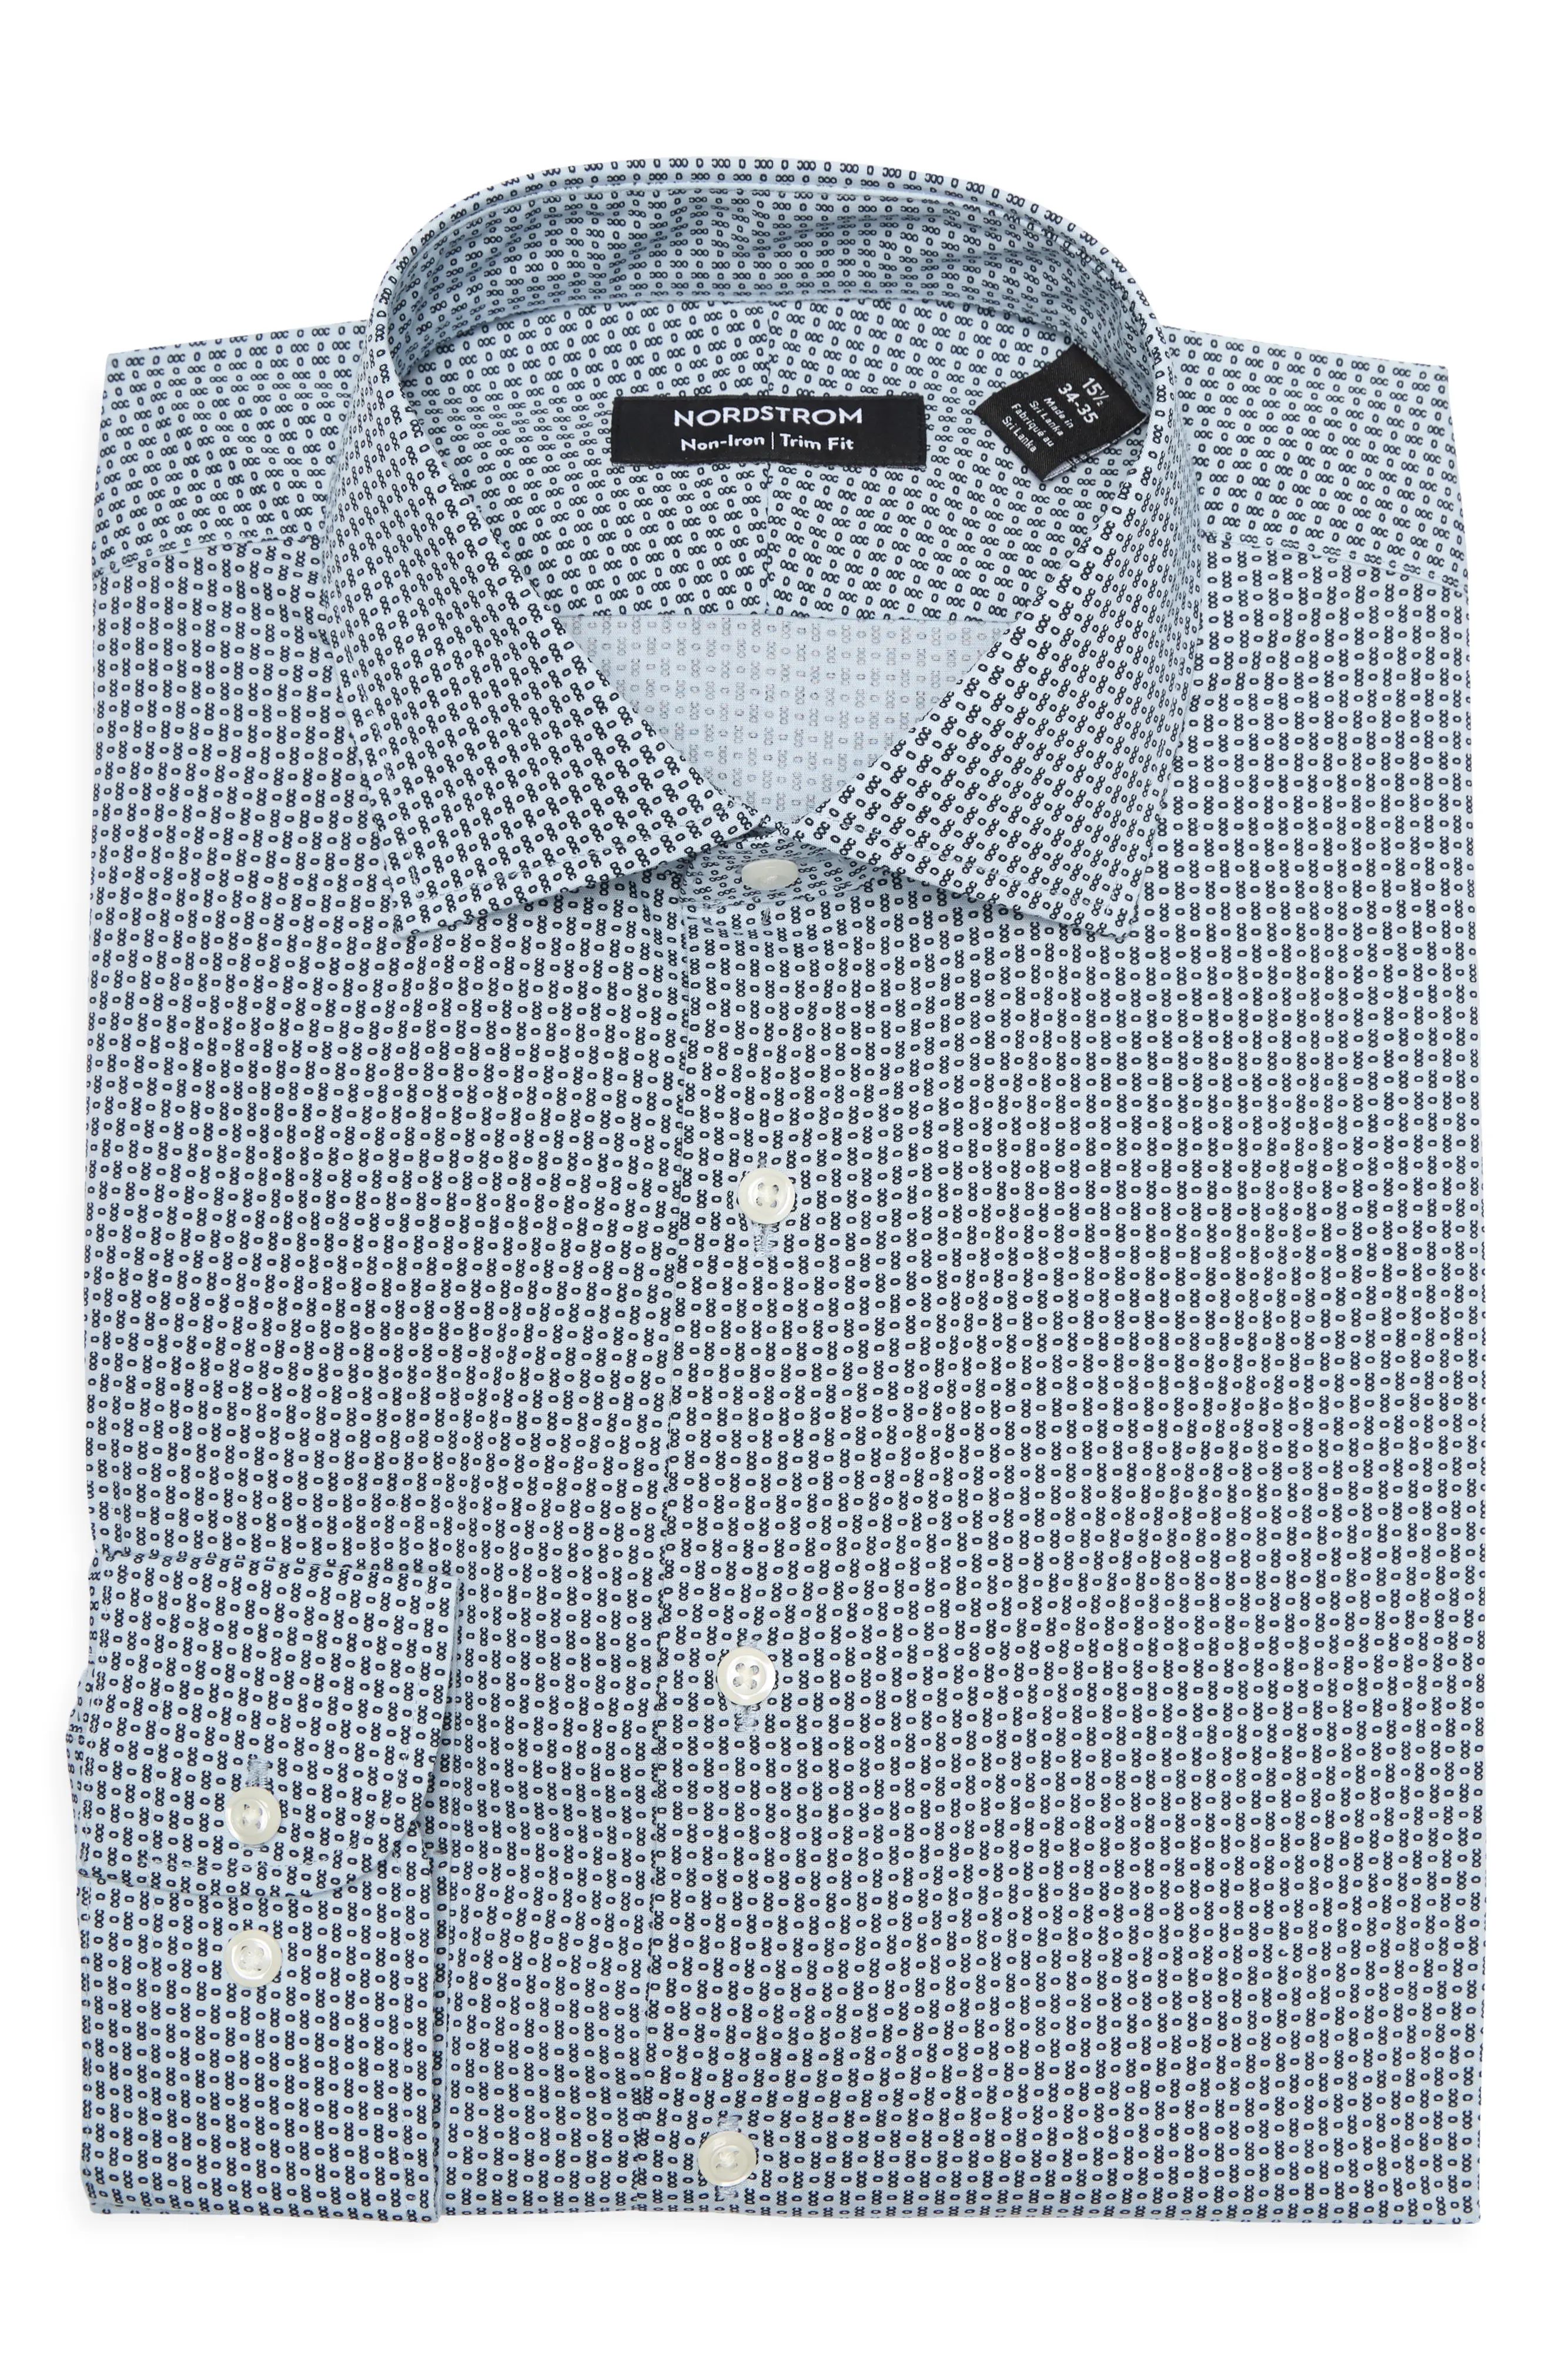 Nordstrom Trim Fit Non-Iron Dress Shirt in Blue- Navy Micro Chr at Nordstrom, Size 17.5 - 34 | Nordstrom